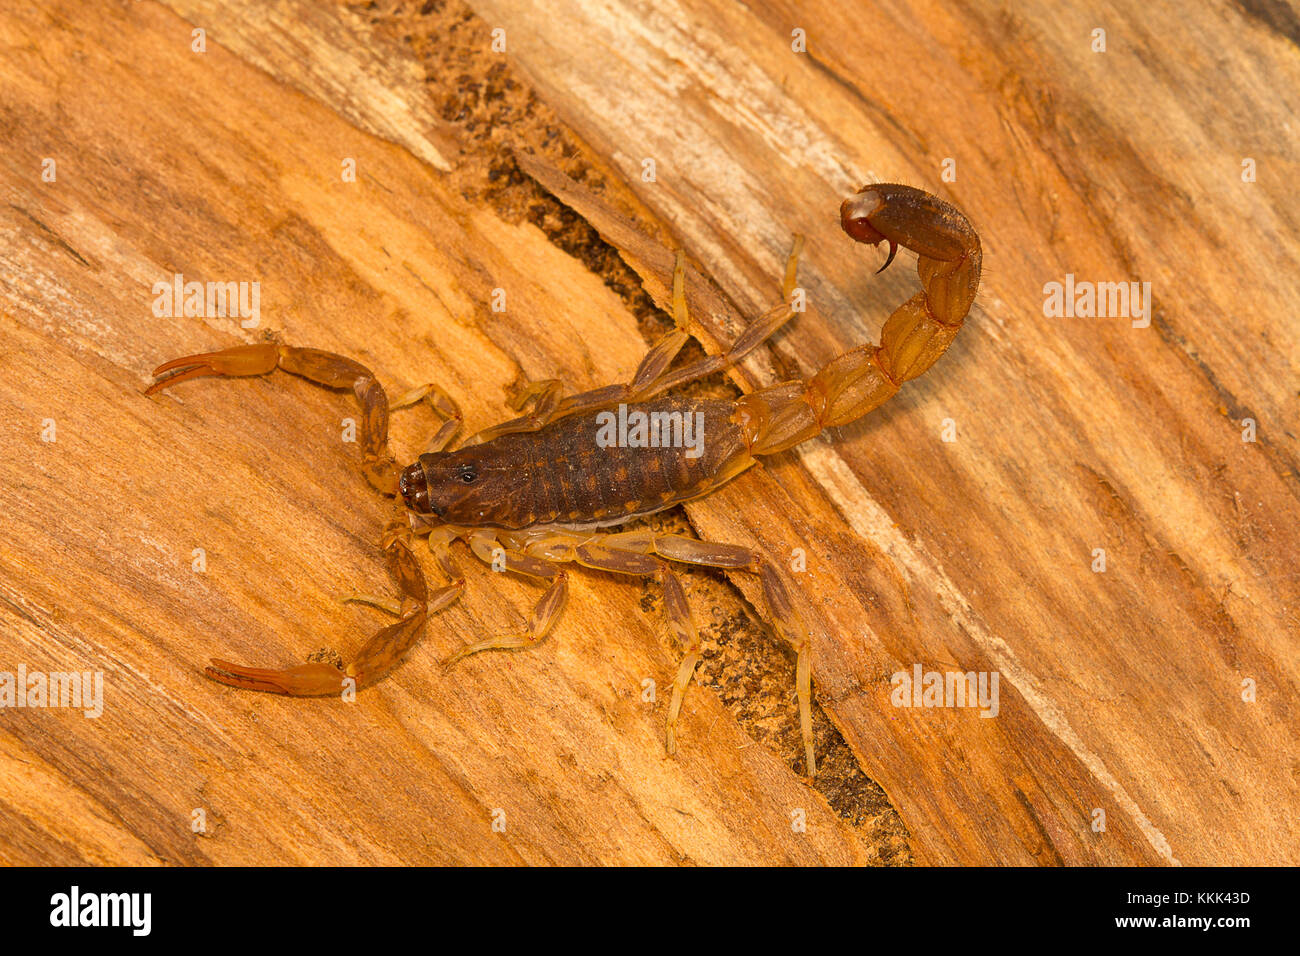 Fat tailed scorpion, genus Lychas from Pondicherry, Tamilnadu, India. These are also known as bark scorpions Stock Photo